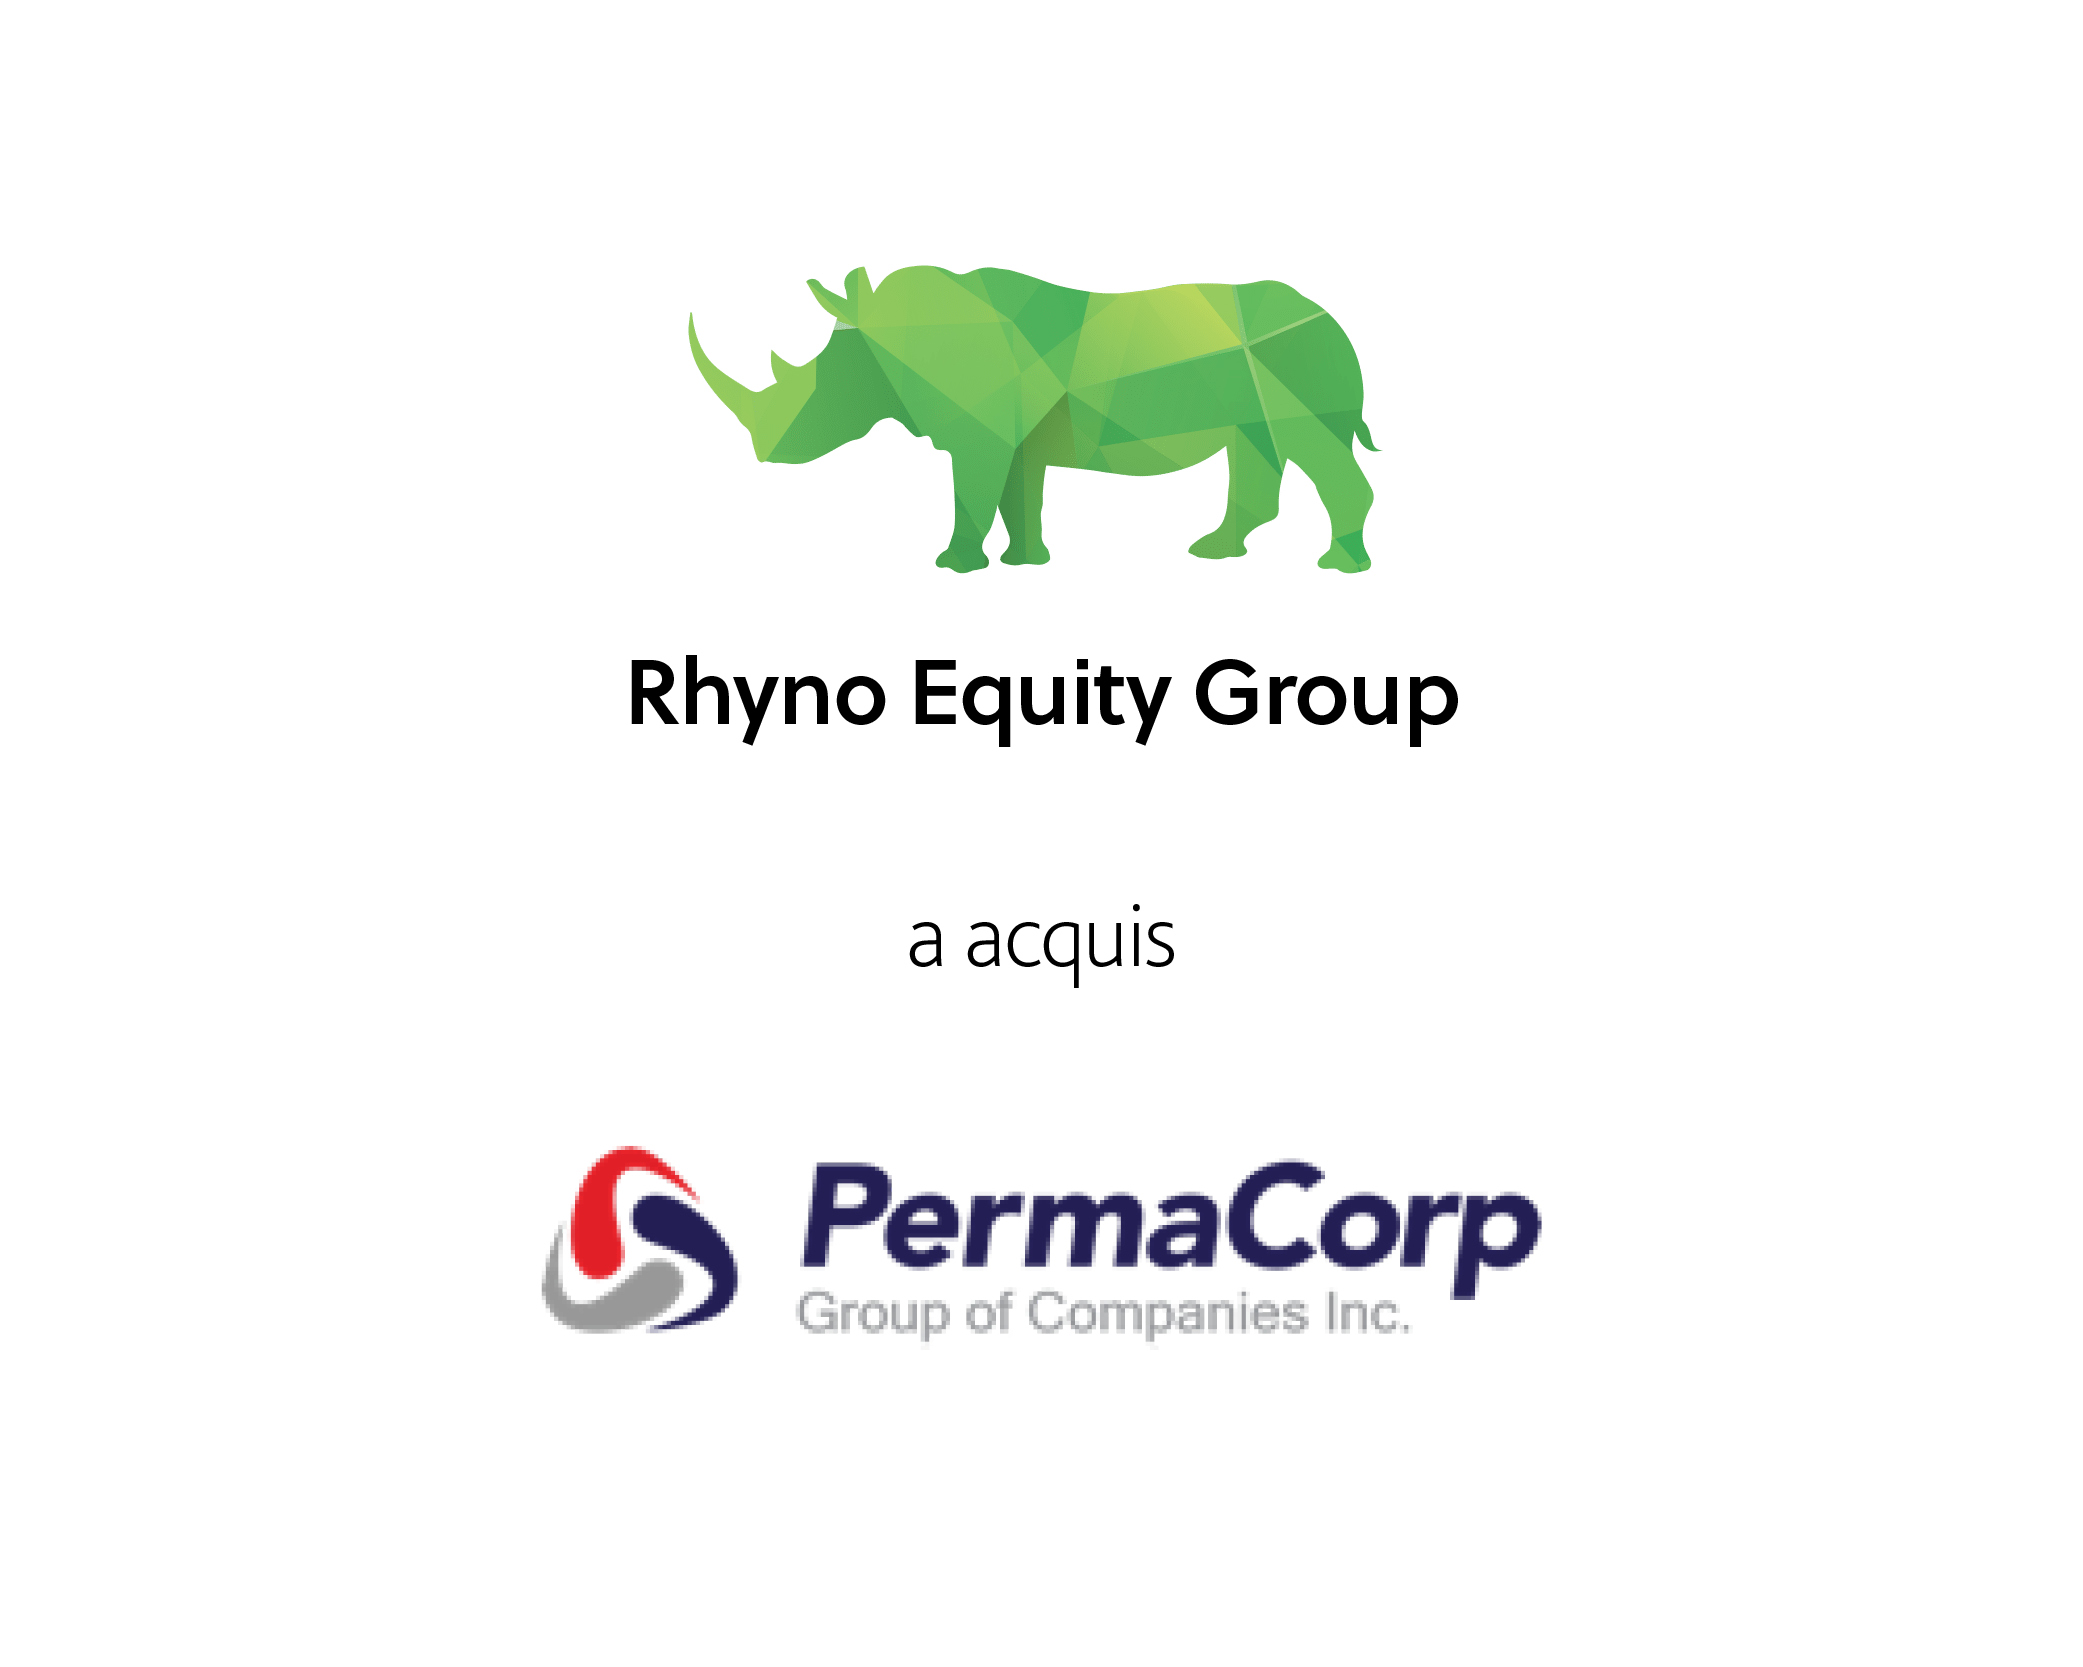 Rhyno Equity Group a acquis Permacorp Group of Companies